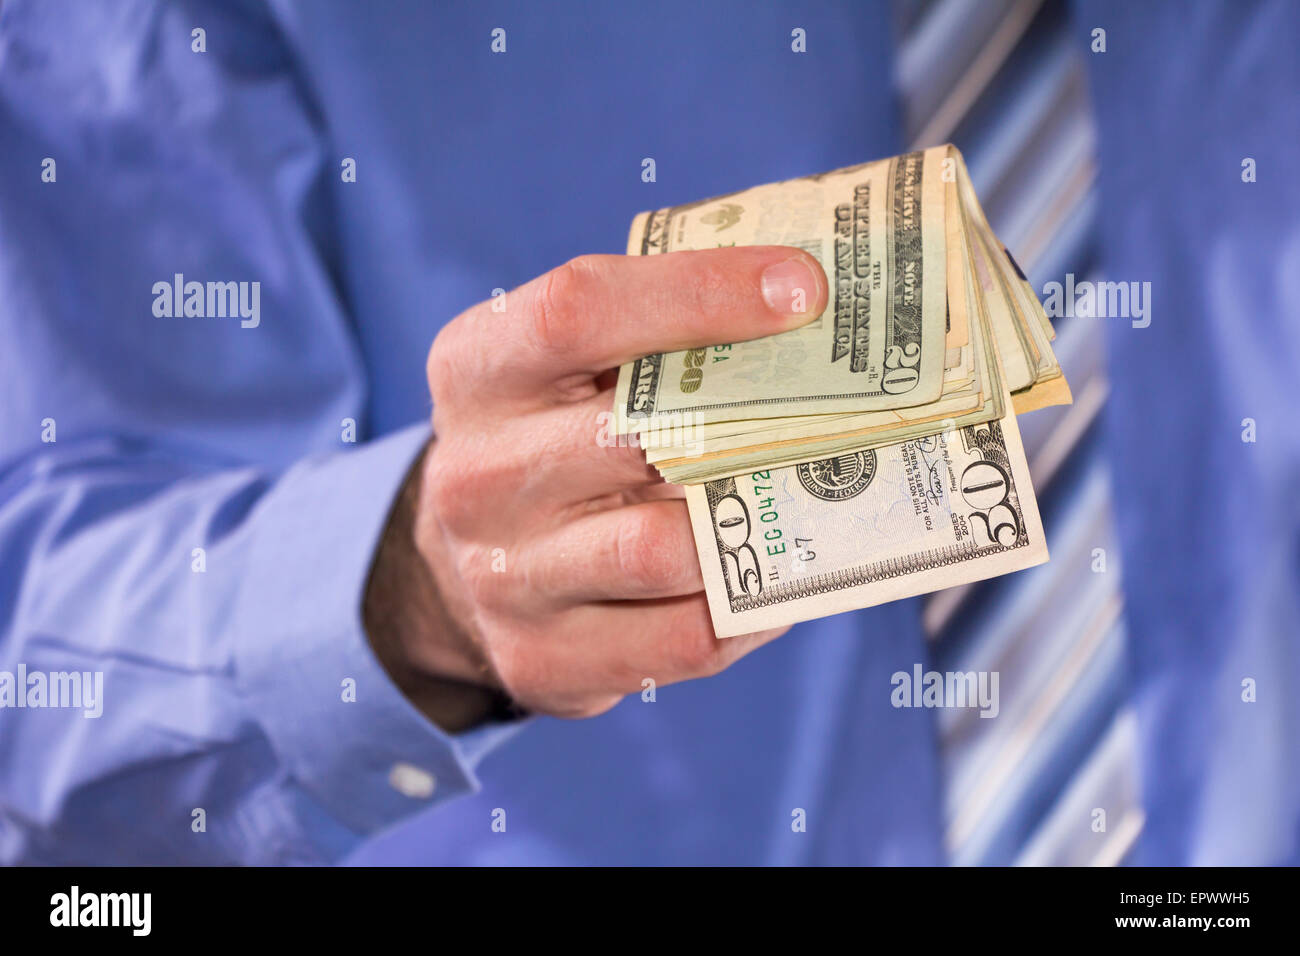 Man in a blue shirt, is paying in dollars banknotes Stock Photo